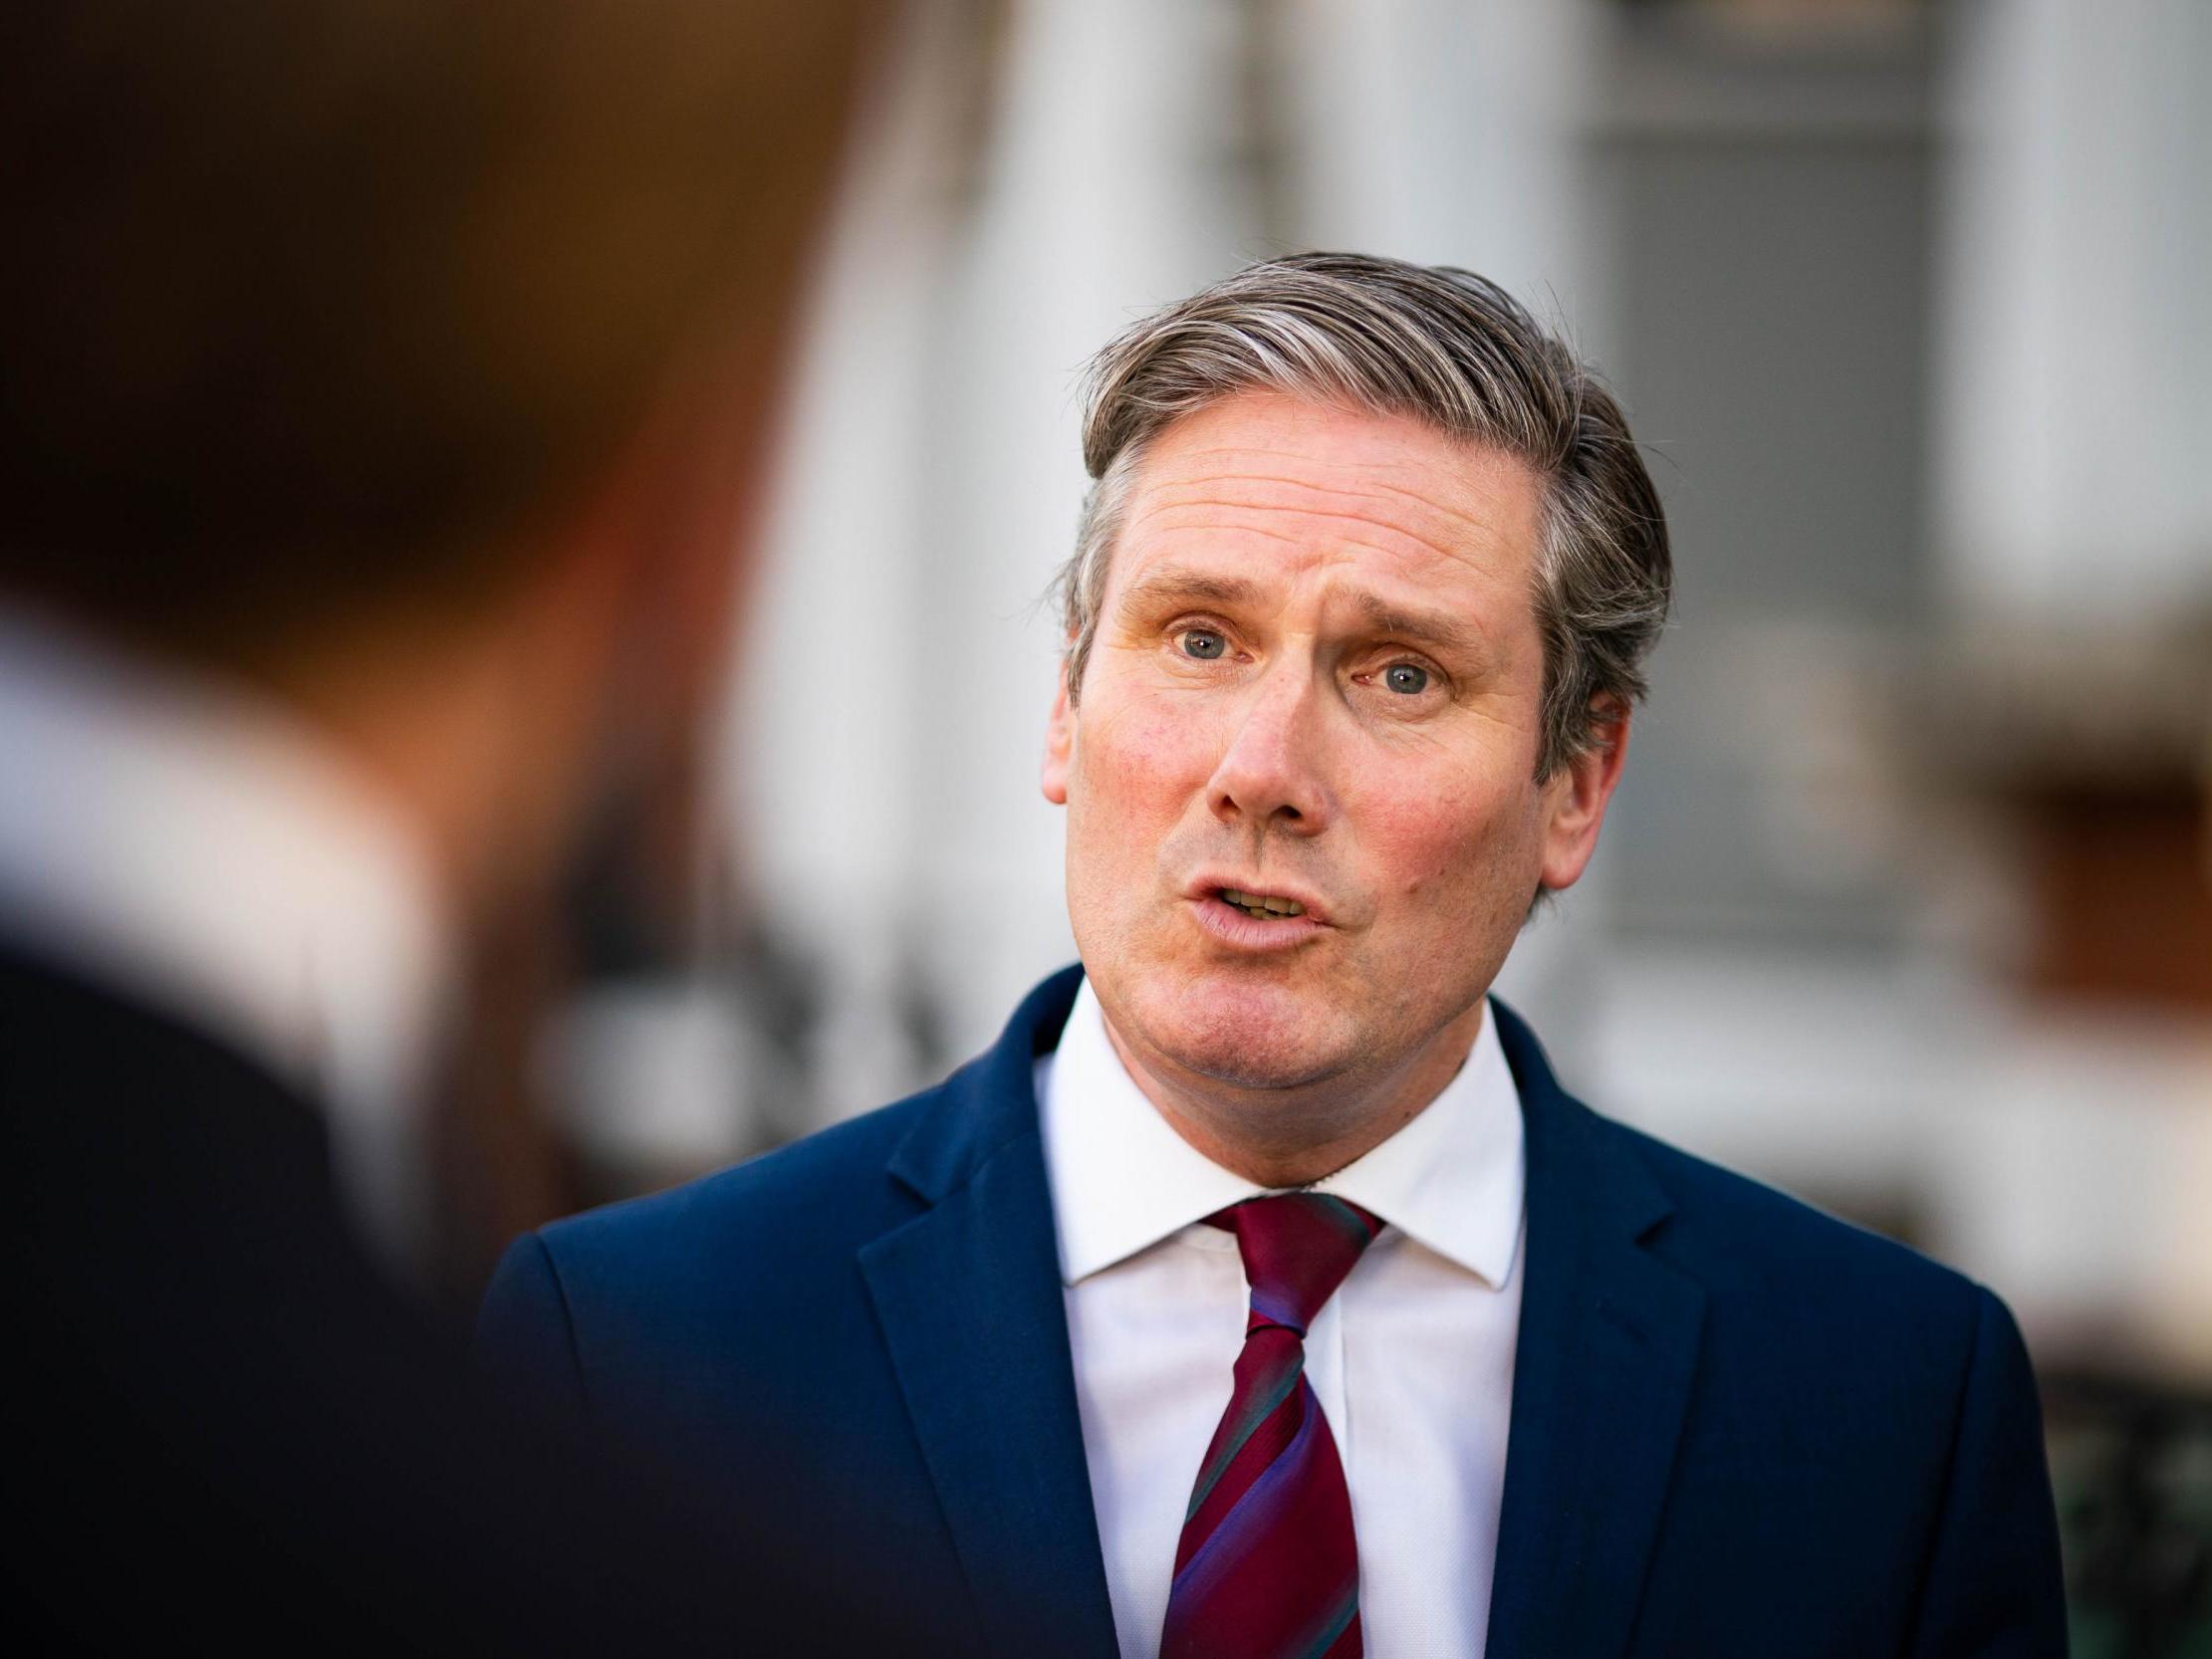 Keir Starmer's swift handling of the Rebecca Long-Bailey situation showed decisive leadership